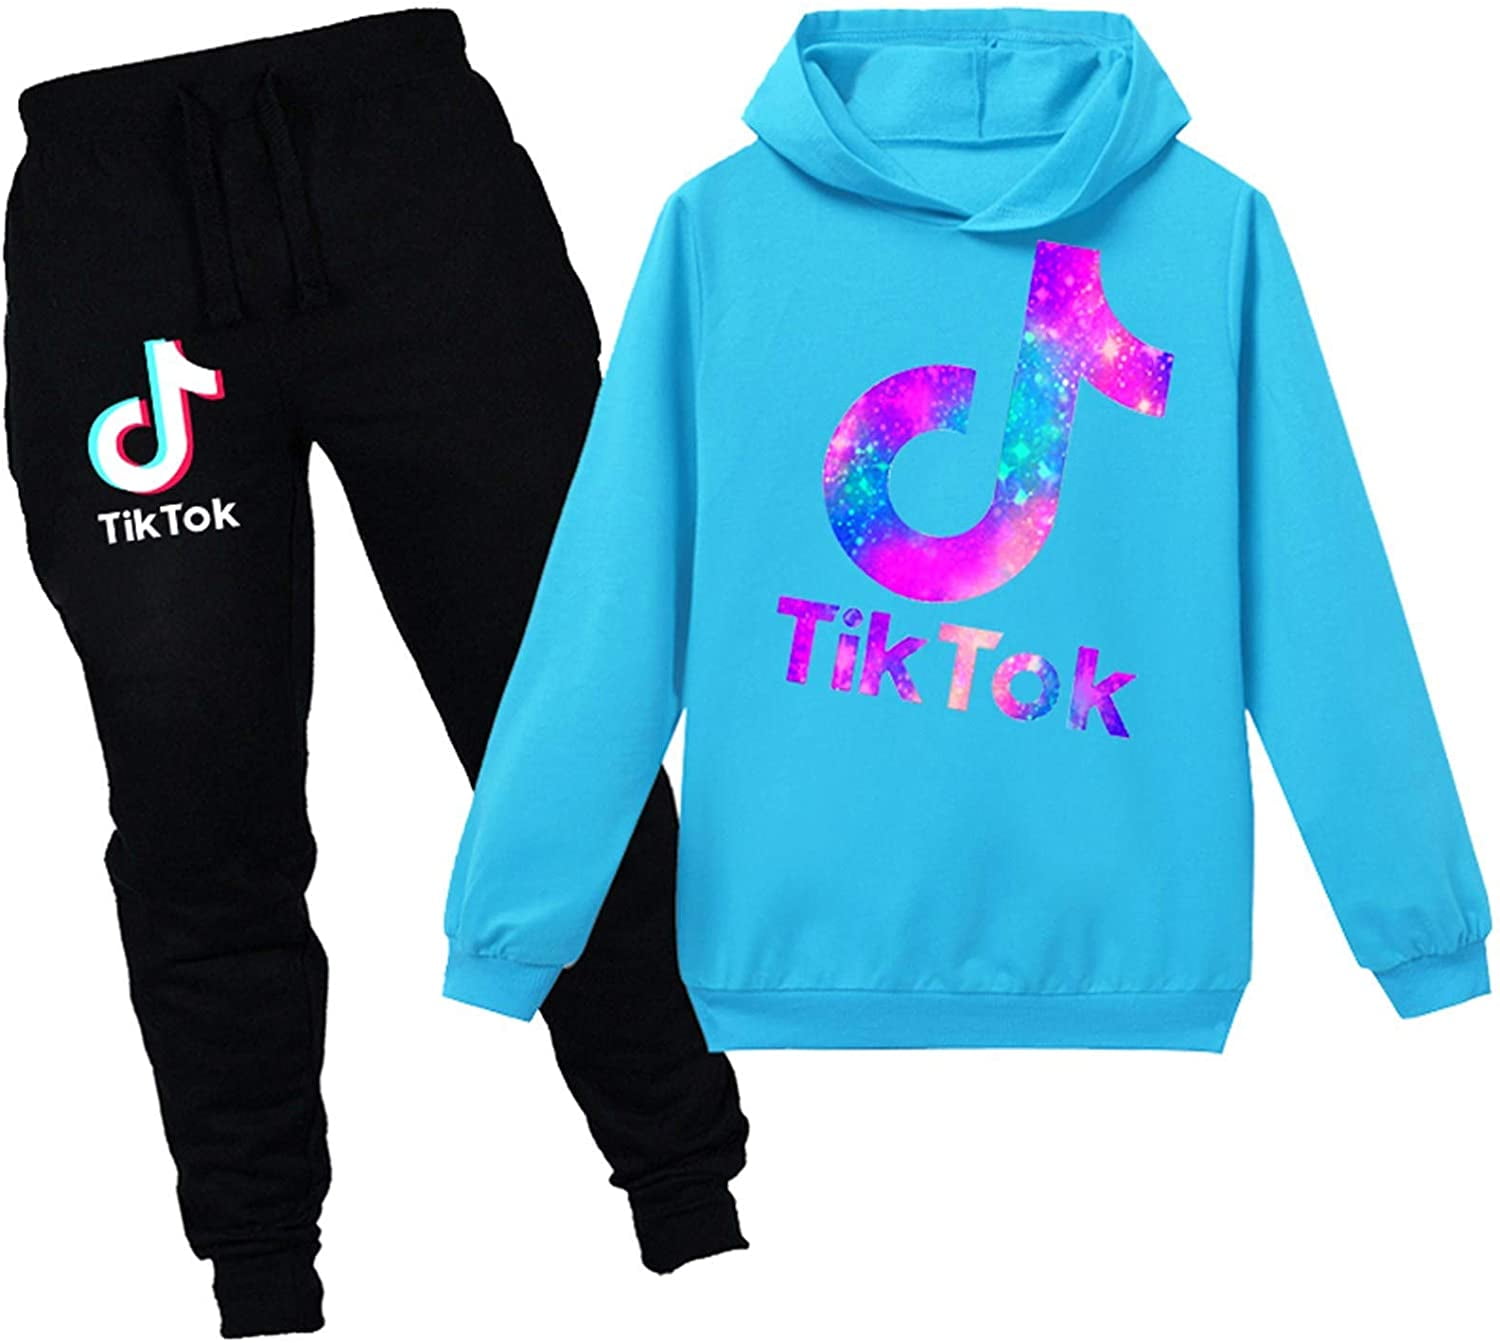 Youth Pullover Hoodie and Sweatpants Suit for Boys Girls 2 Piece Outfit Fashion Sweatshirt Set 